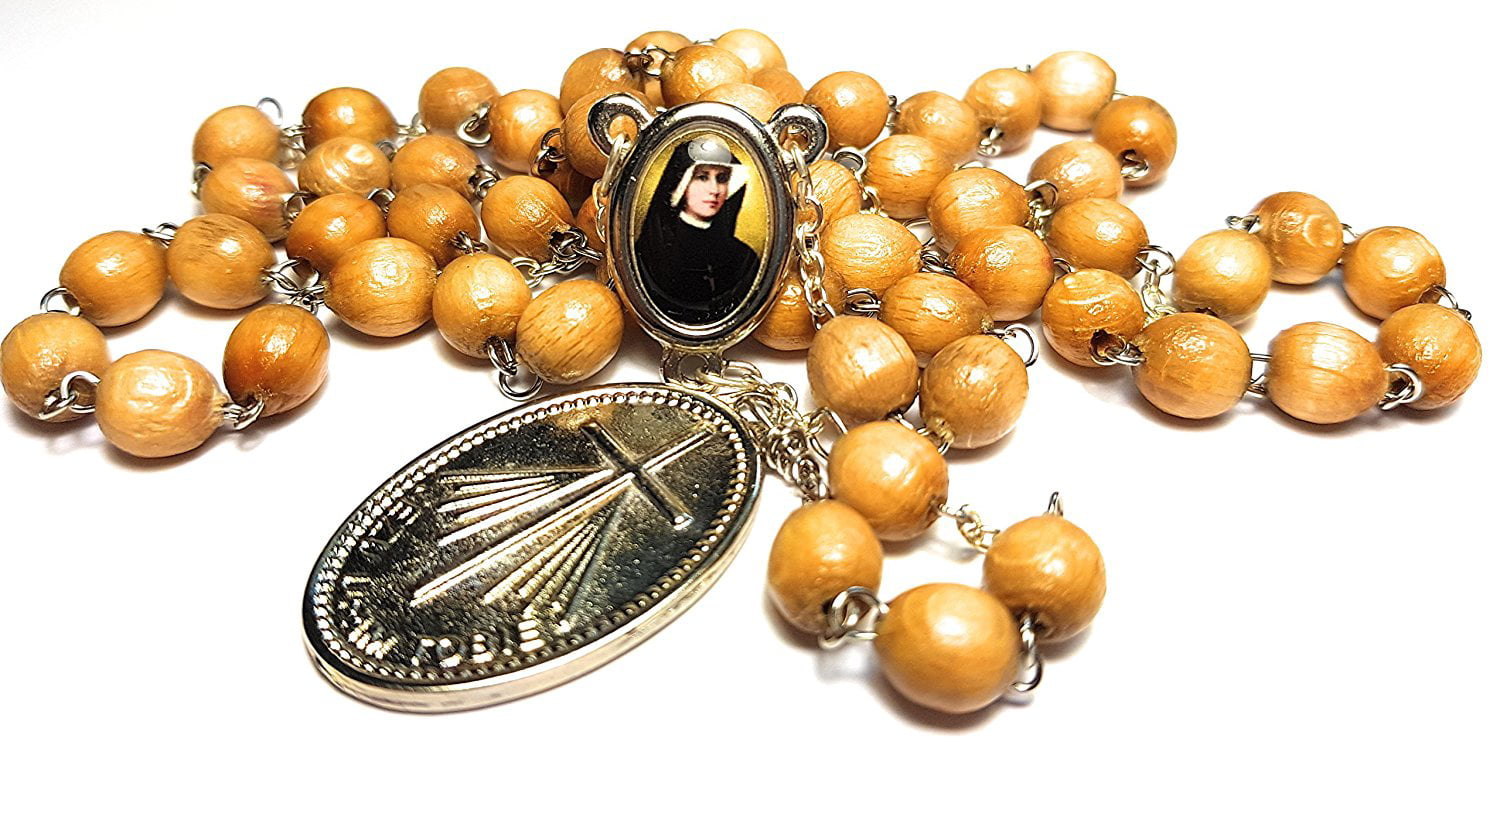 Black on The Cord Saint Faustina Kowalska Mystic Visionary True Relic Chaplet Apostle Divine of Mercy with Miraculous Medal Jesus I Trust in You Chaplet Three O' Clock Prayer Poland Polish Novena